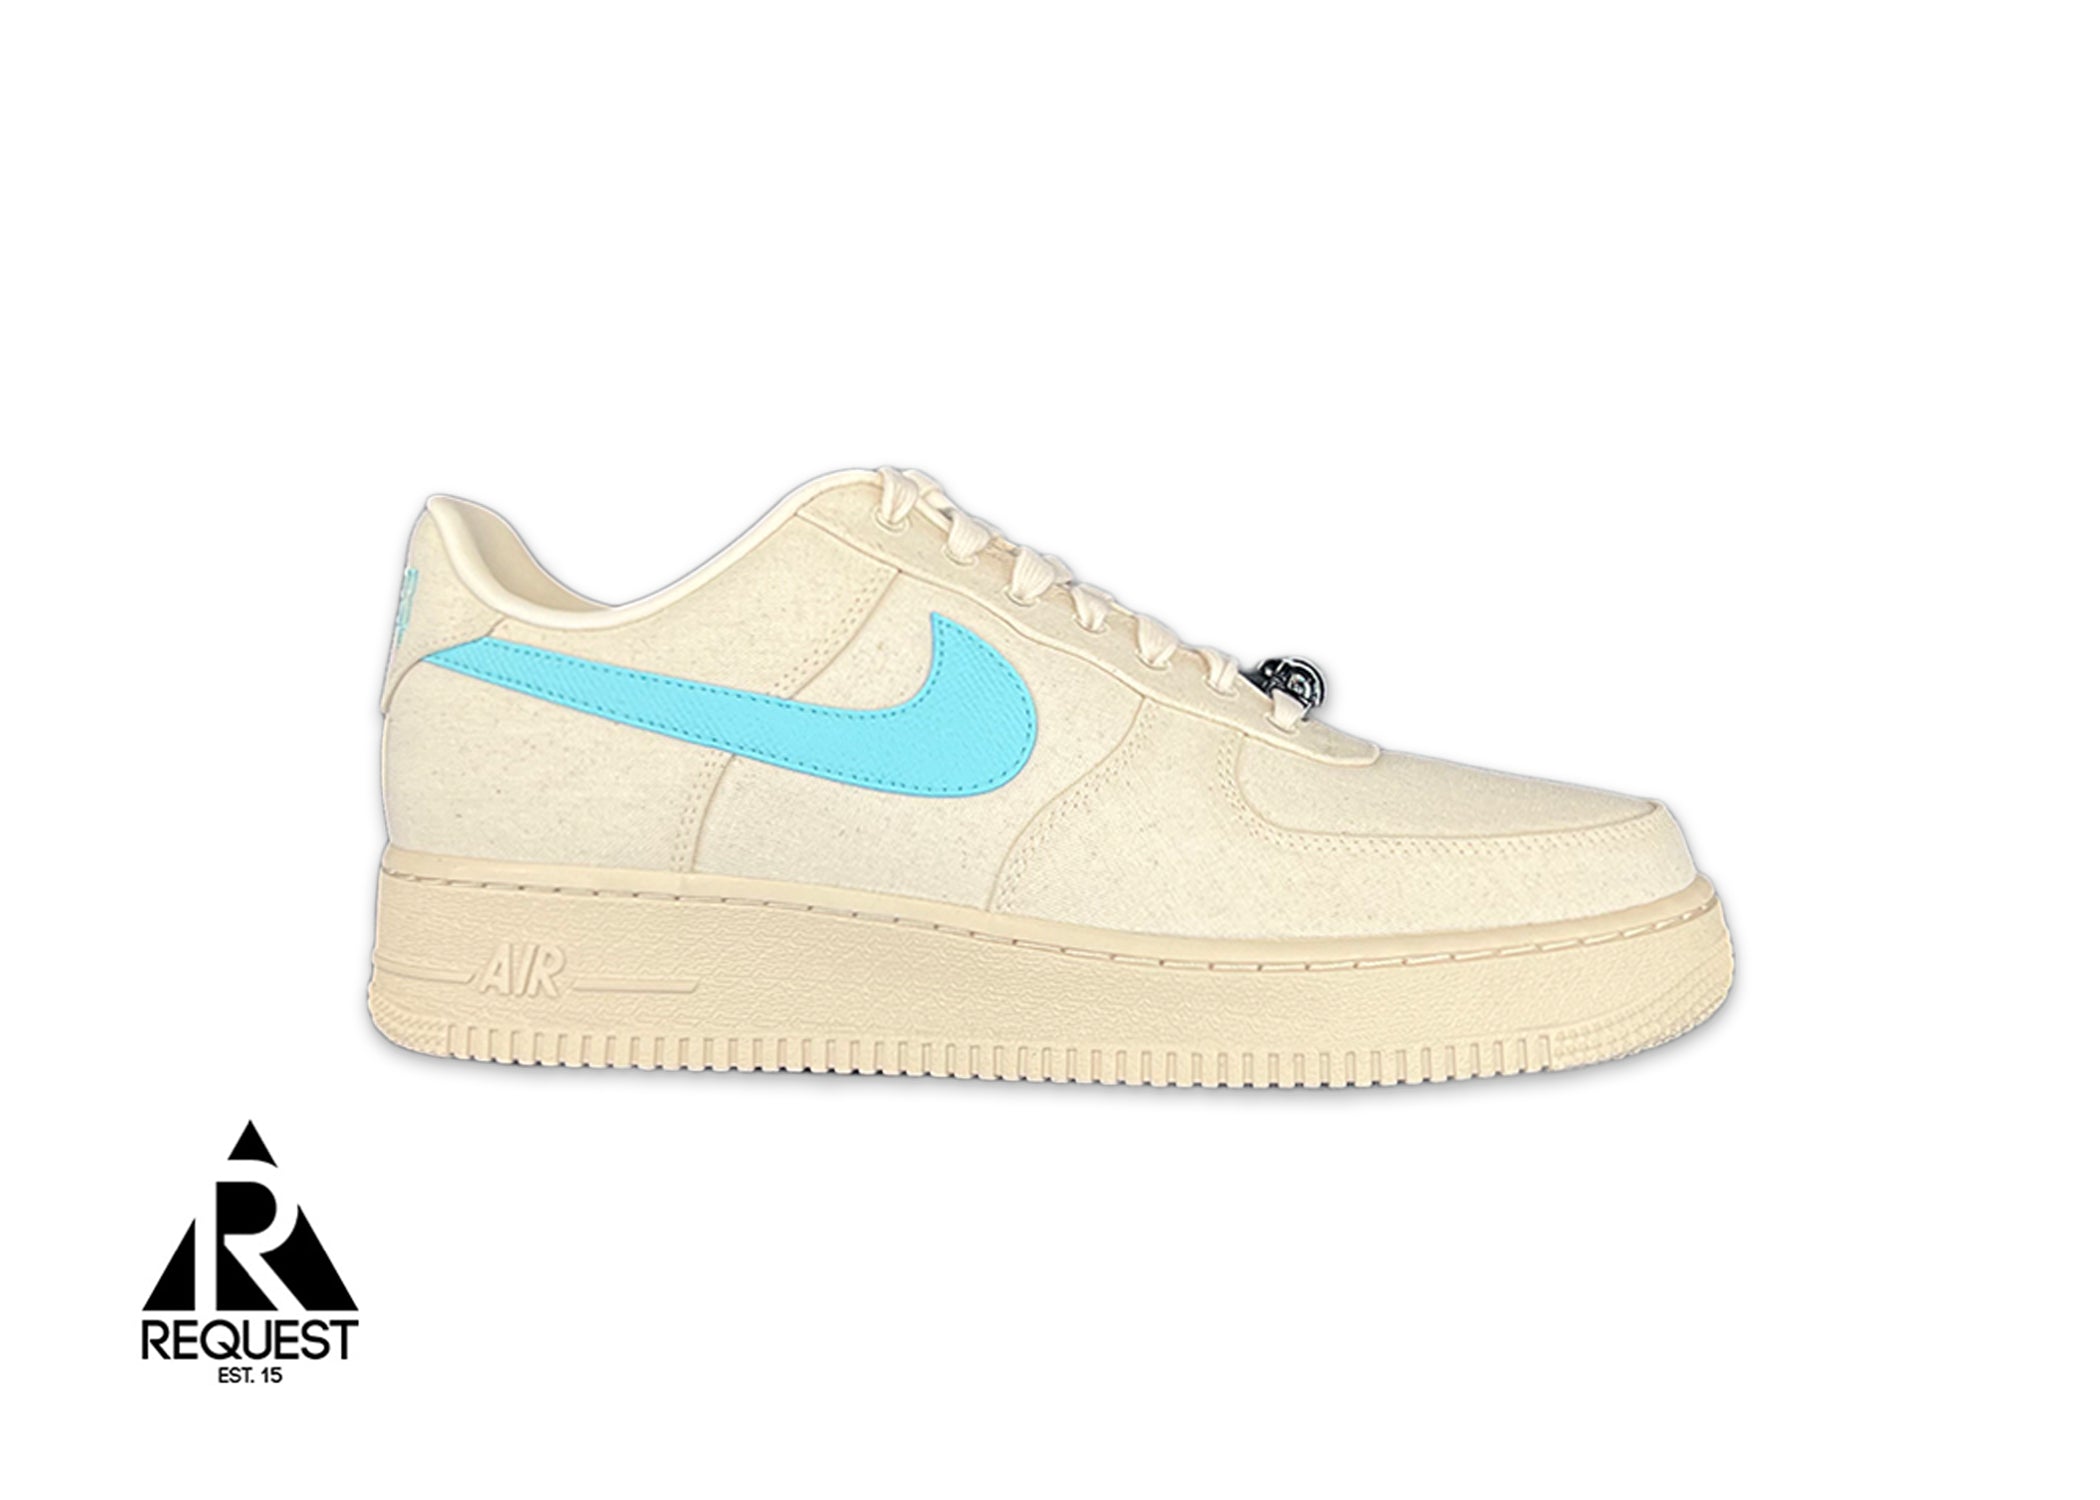 New Arrival… Af1 What The LA Size : 12 Price : 28,875 #RIFMNL For inquiries  , Pls send a dm on our IG Store hrs : 11-6pm Daily